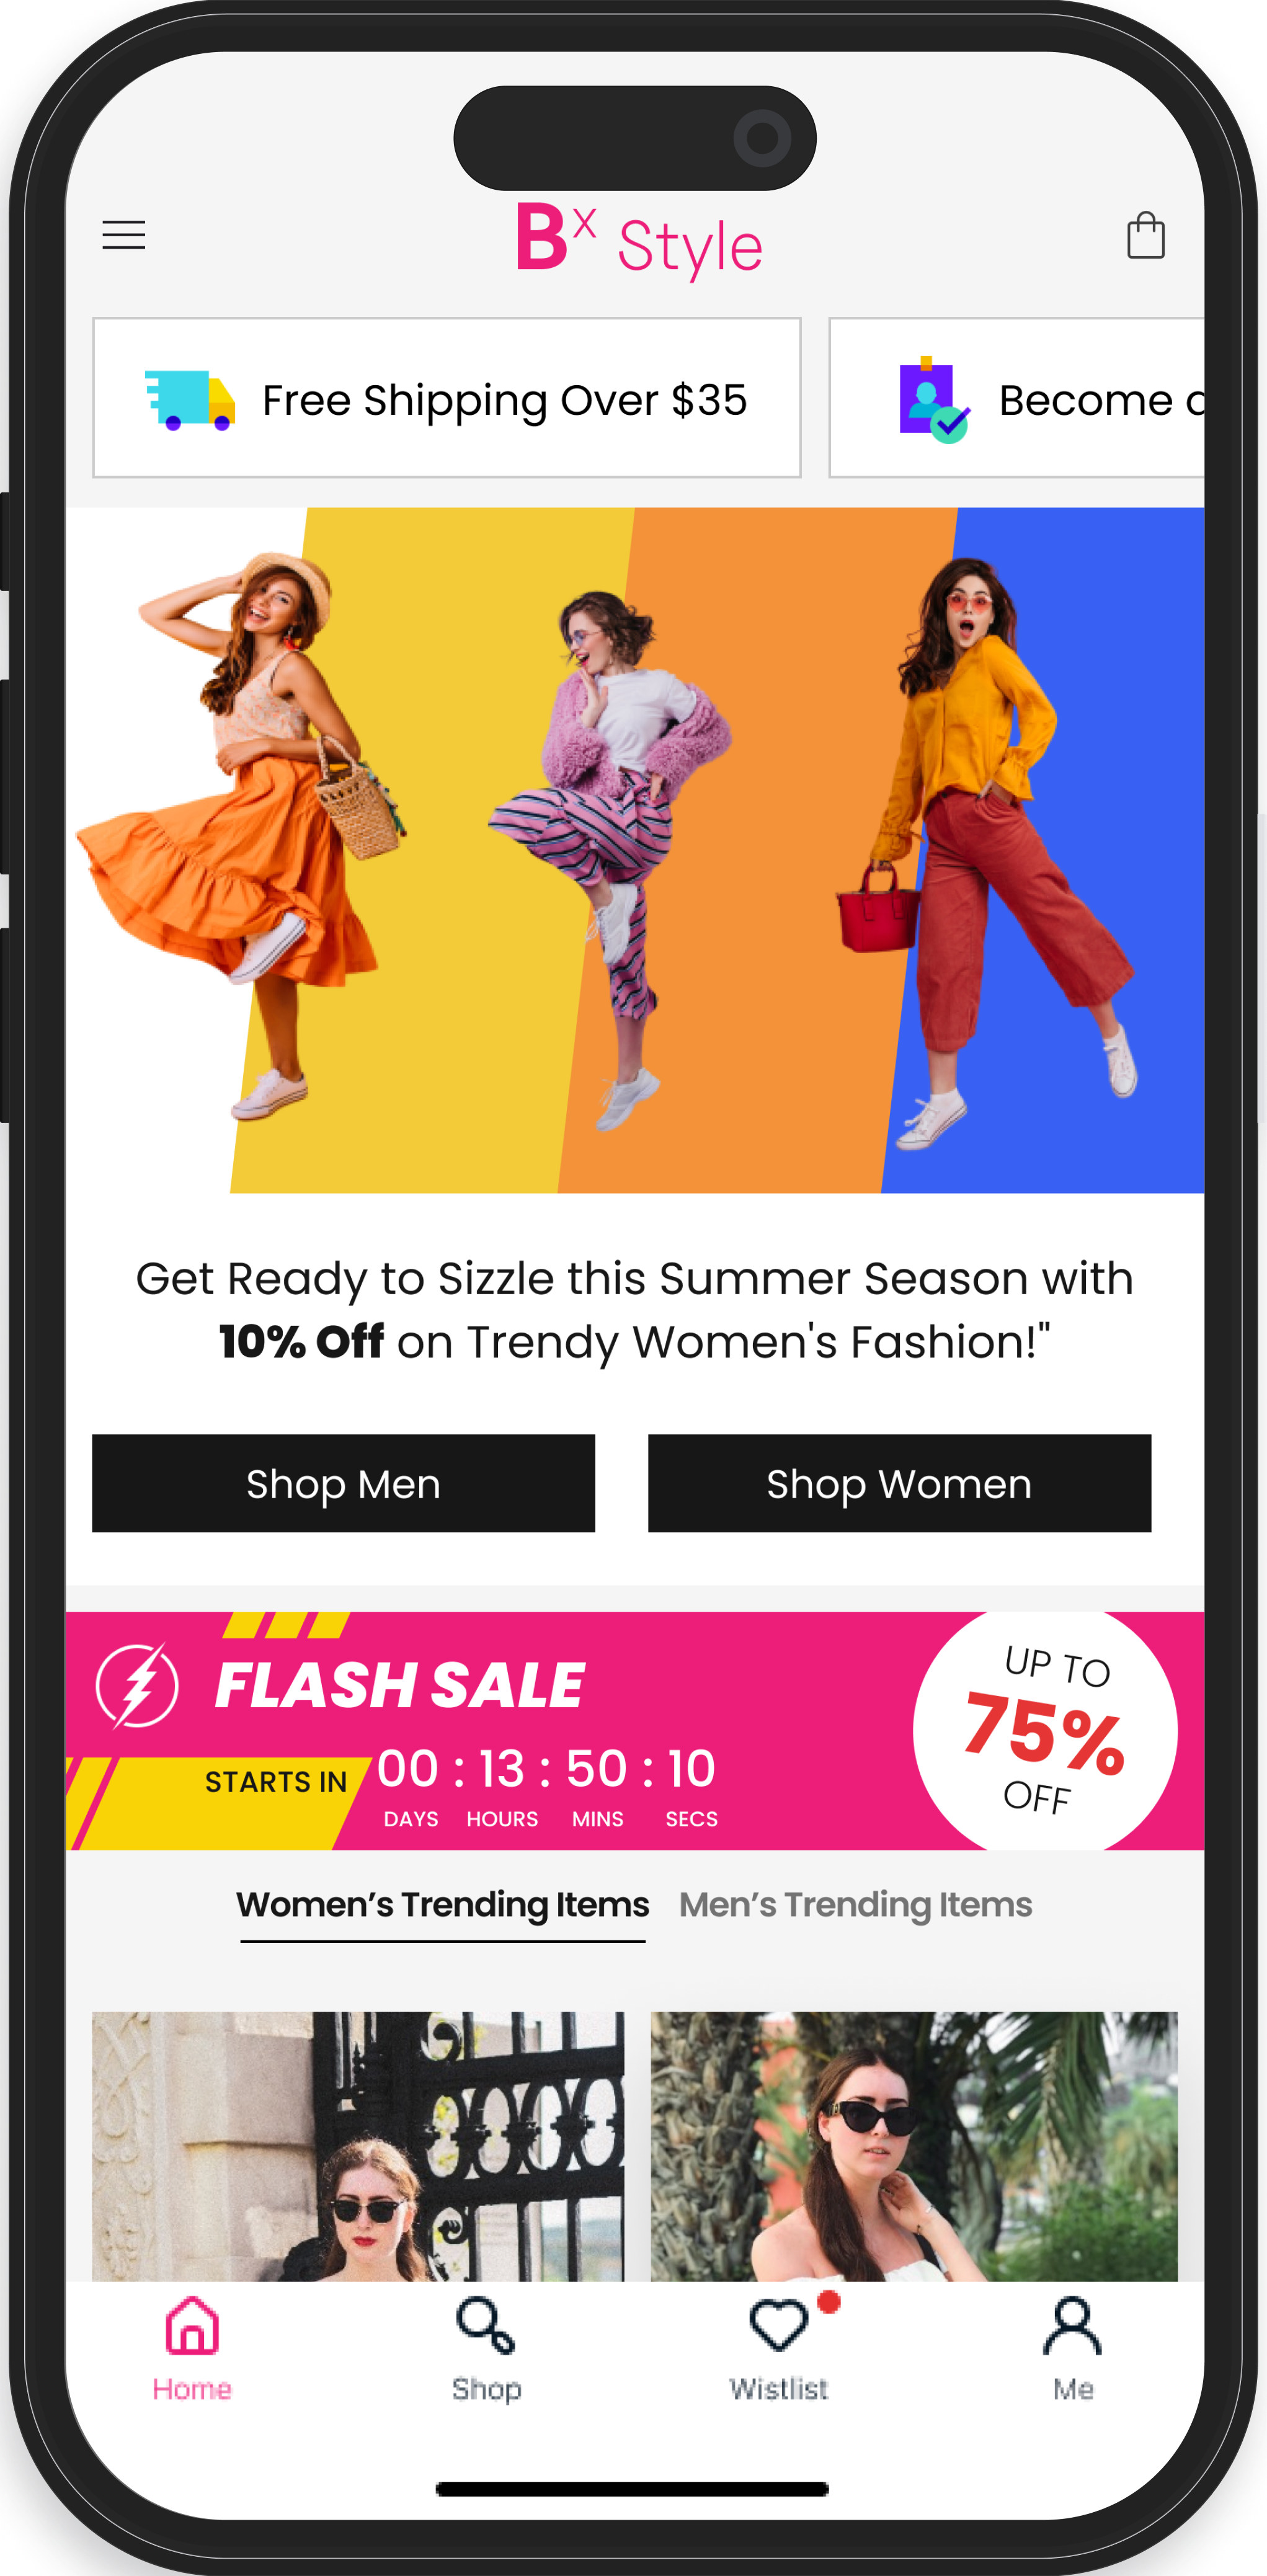 The image shows a smartphone screen displaying a mobile e-commerce fashion application. The top of the screen has a promotional banner with 